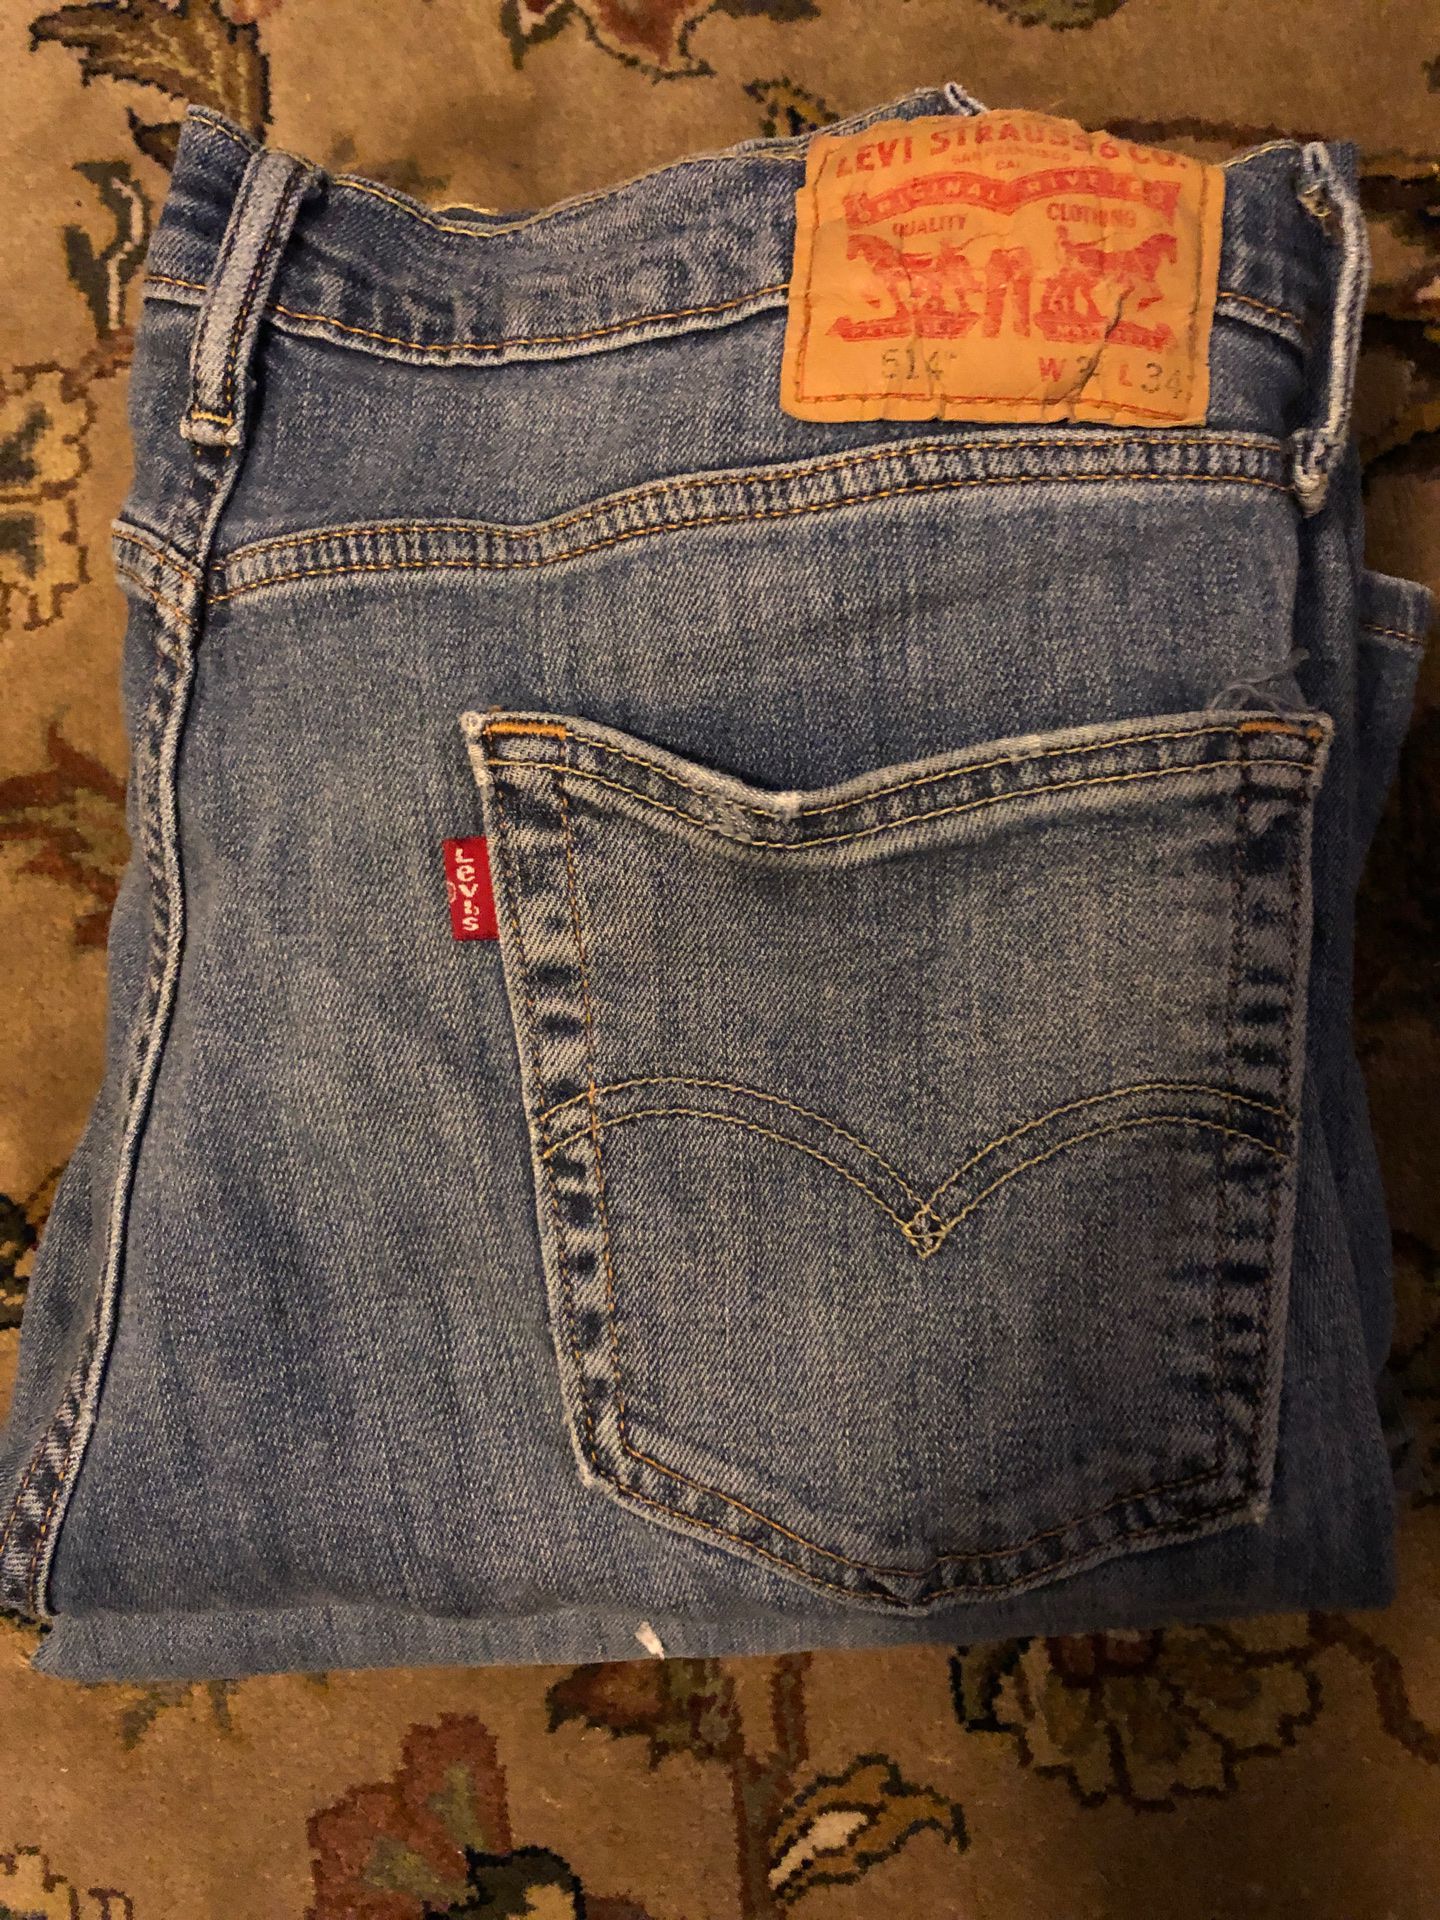 4Pair of worn in Levi’s. 34x32 and 34x34